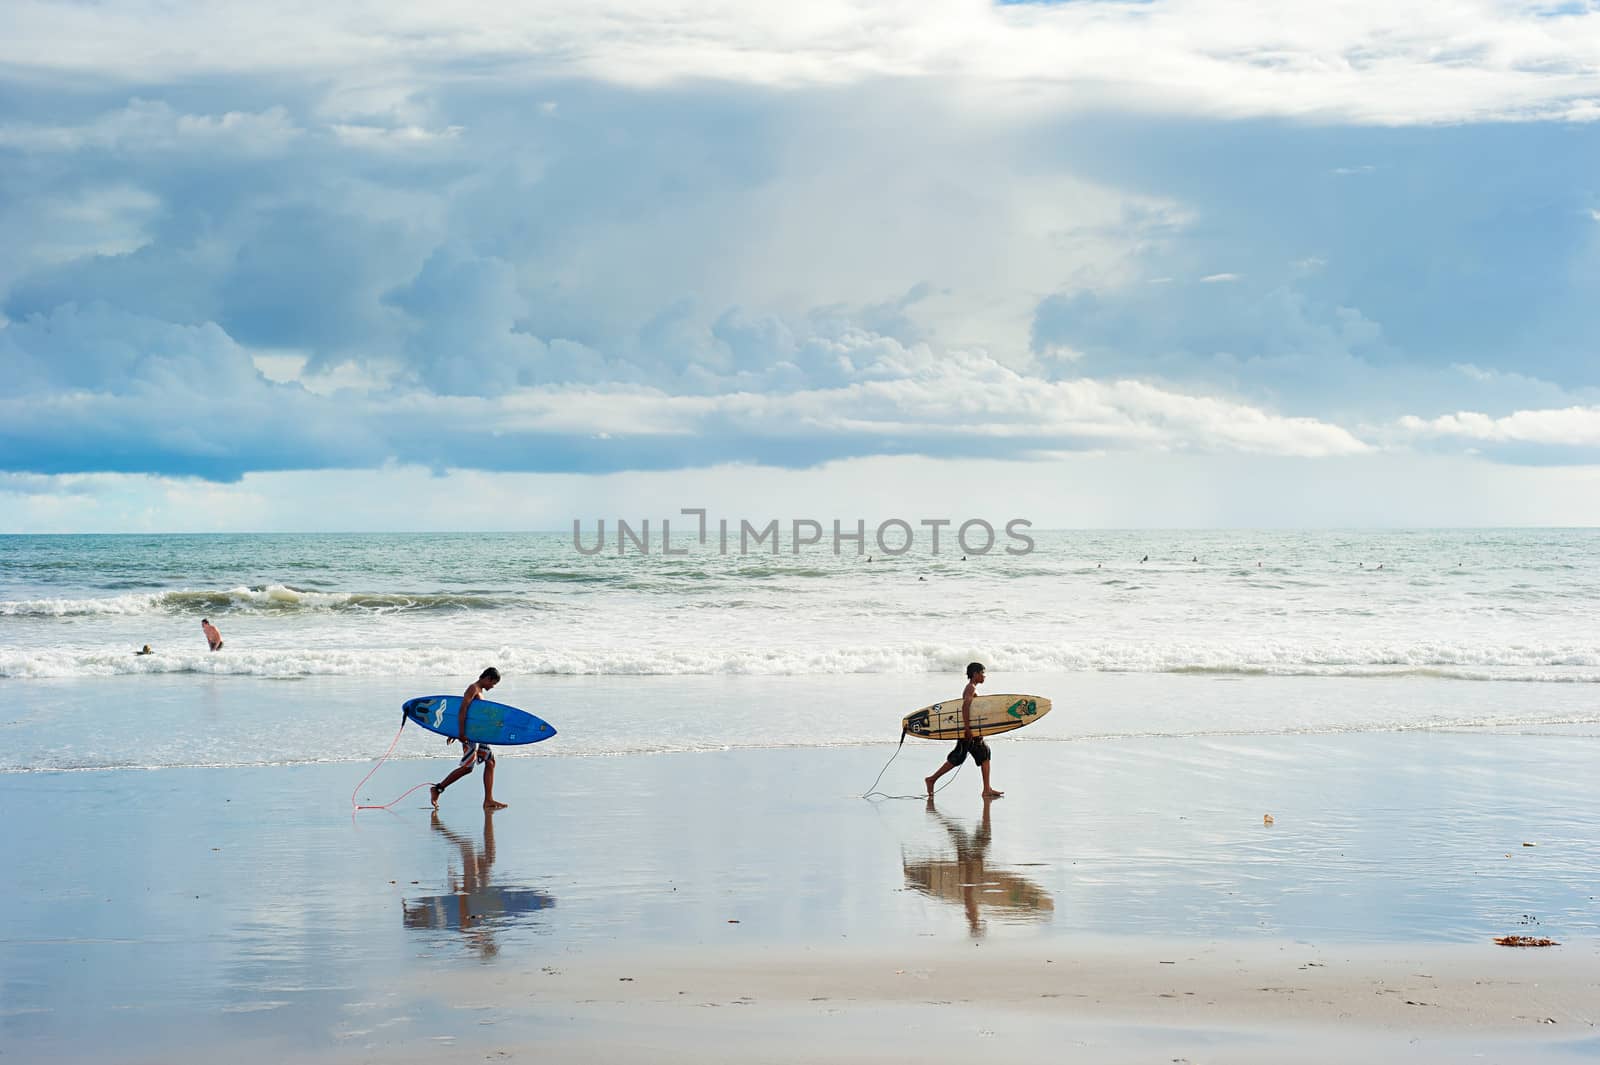 Bali island; Indonesia - March 16, 2013: Local boys walking with a surfboards on the beach. Bali is one of the top of world surfing destinations.